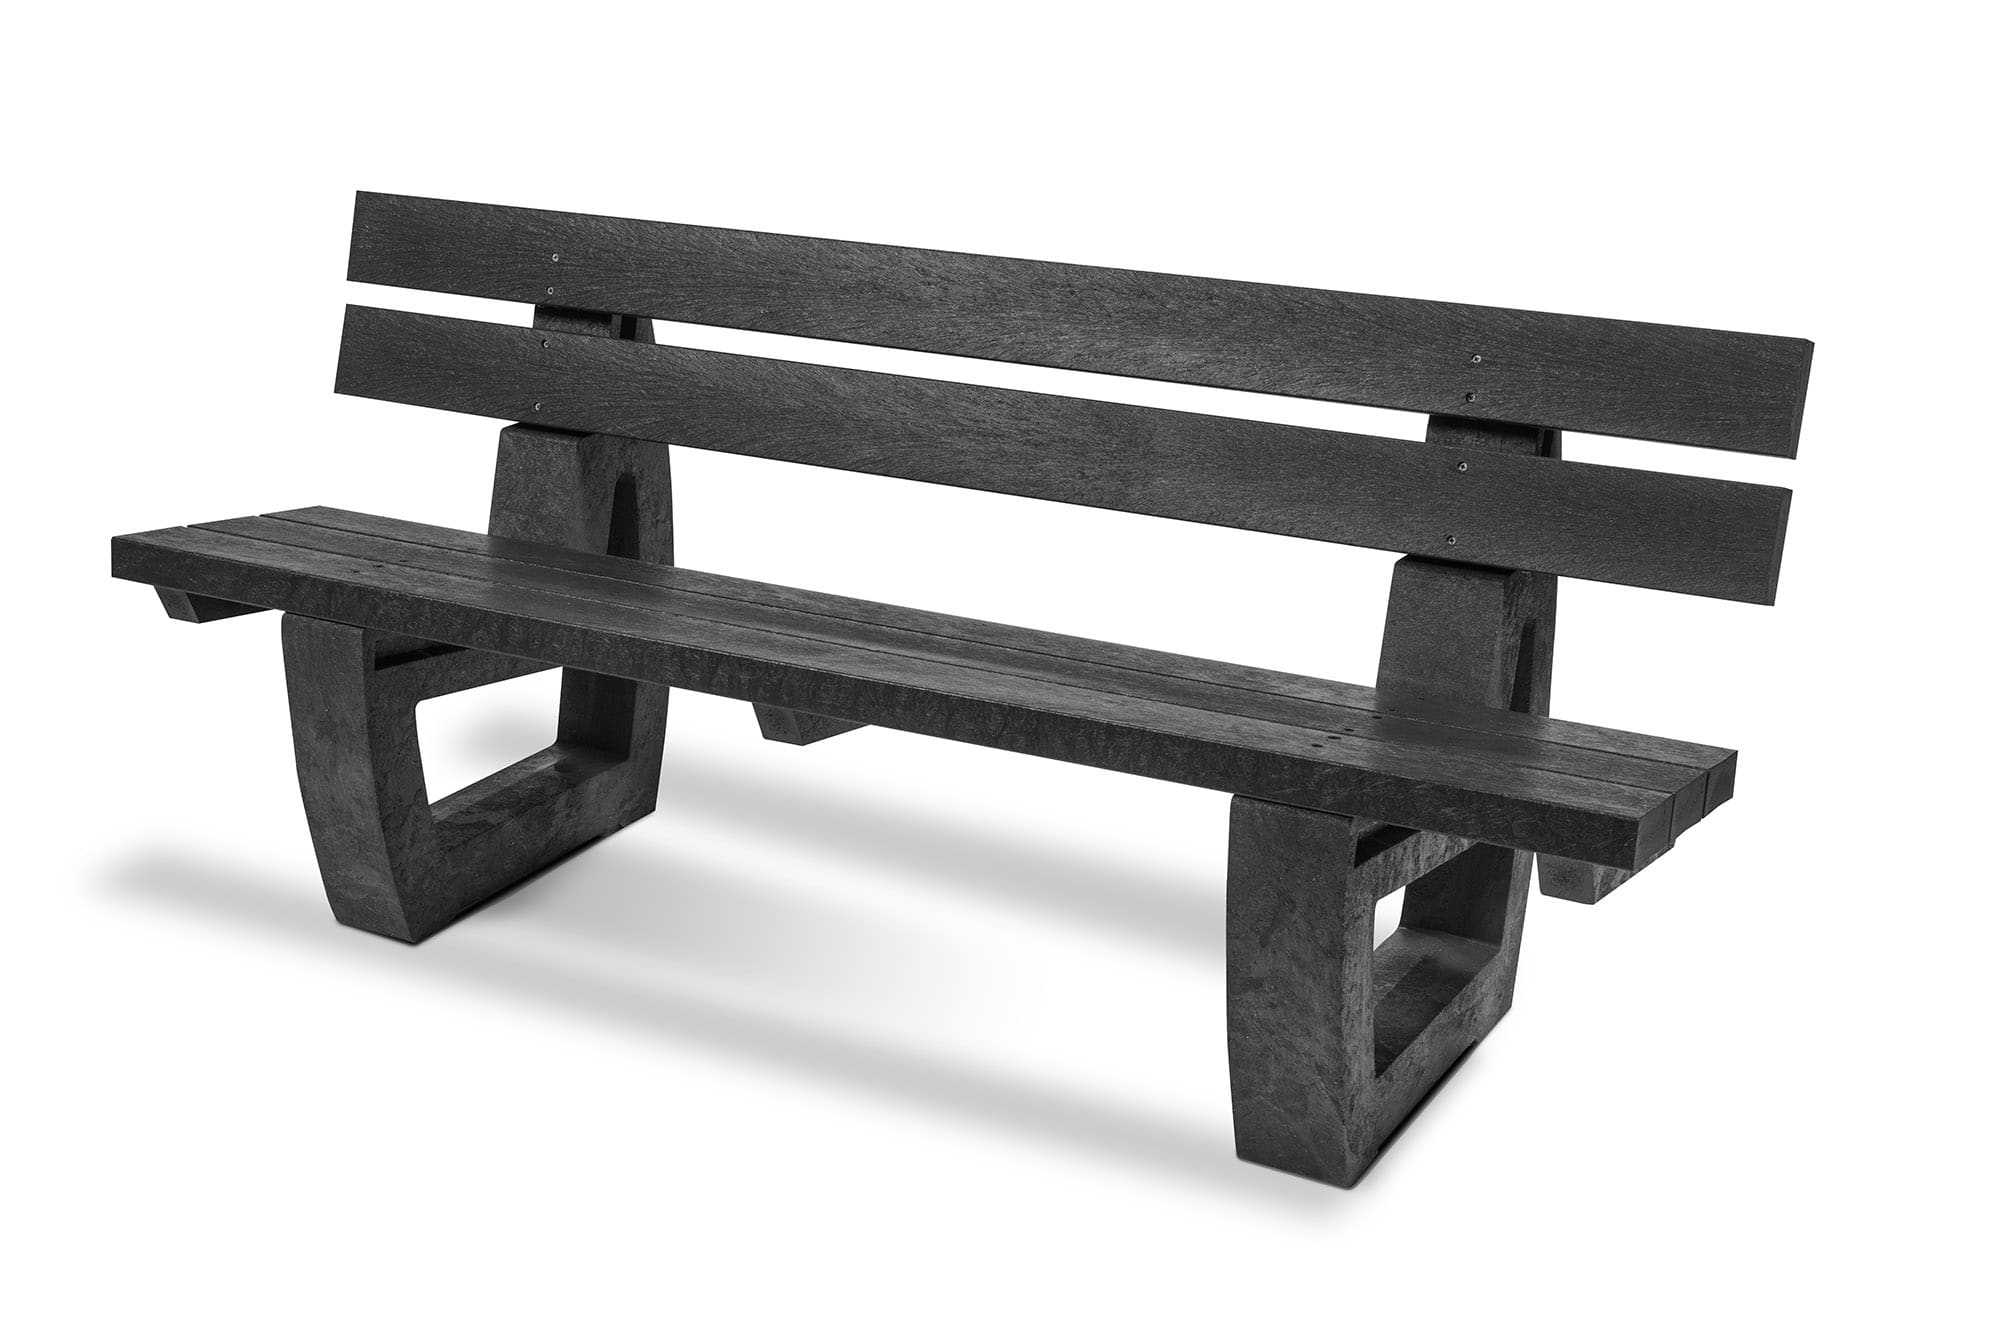 The Batley recycled plastic walkthrough picnic table is part of our accessibility range, seen here in black